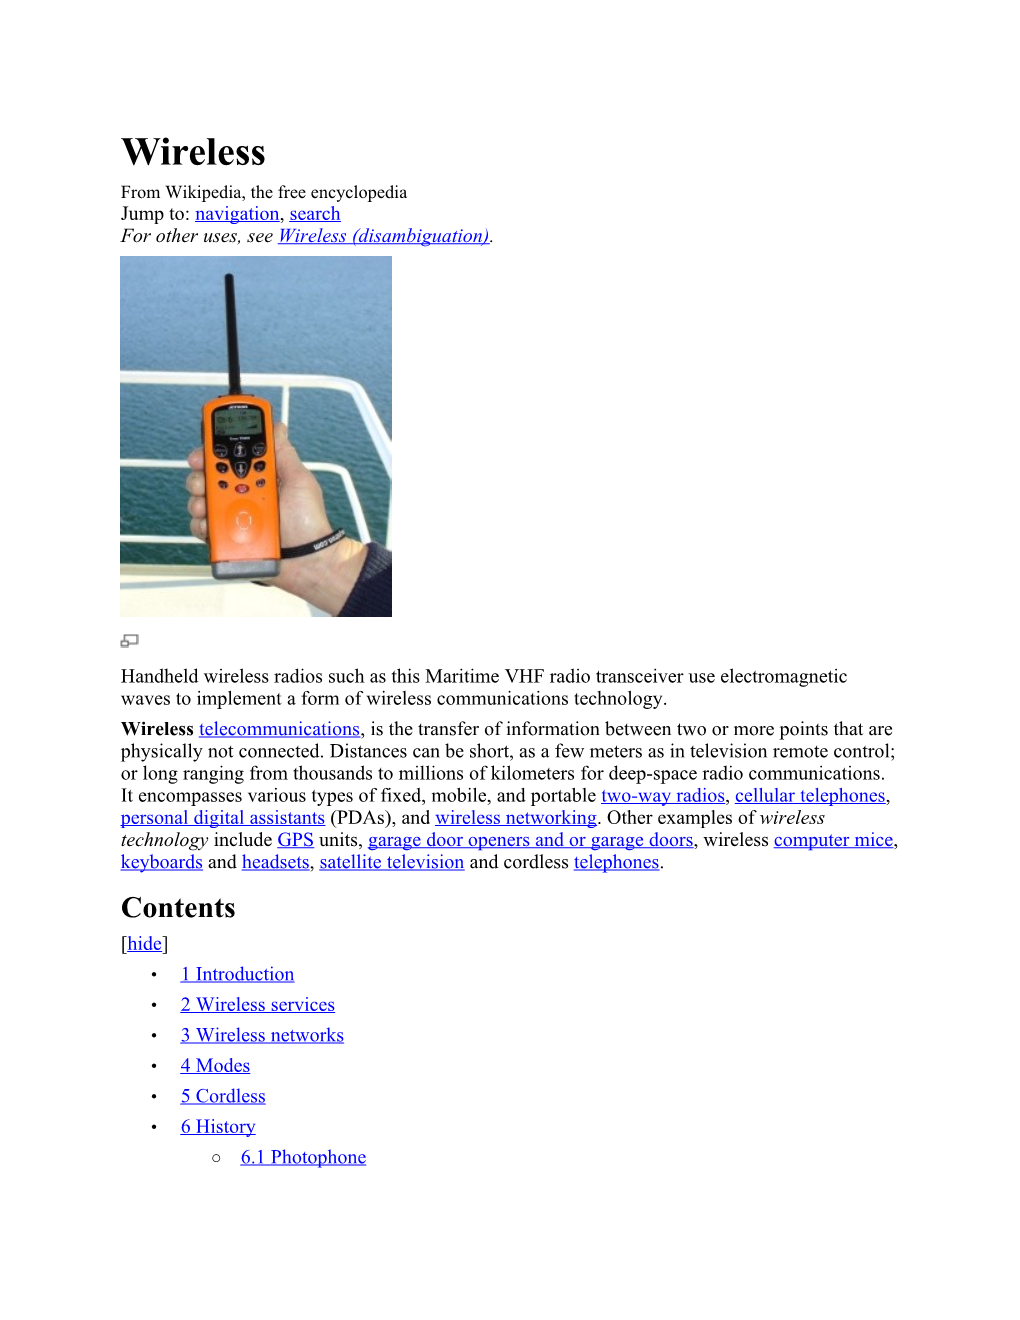 Wireless from Wikipedia, the Free Encyclopedia Jump To: Navigation, Search for Other Uses, See Wireless (Disambiguation)